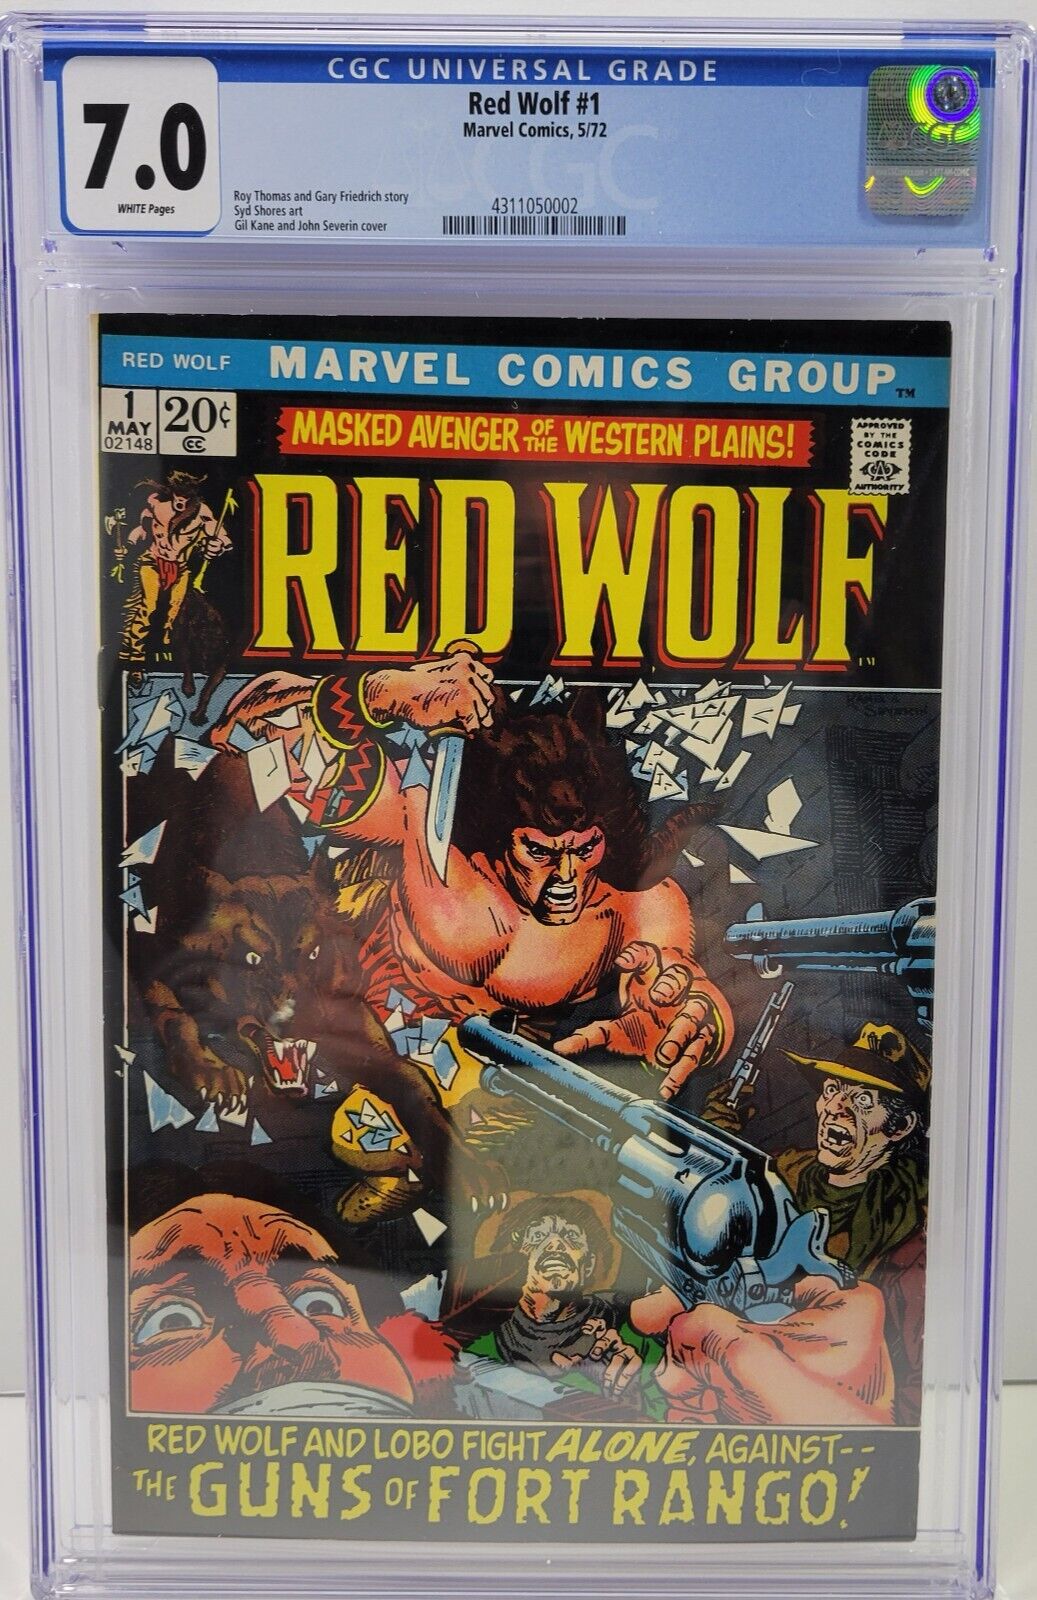 RED WOLF #1 CGC 7.0 VERY FINE WHITE PAGES 1972 MARVEL COMICS WESTERN GIL KANE cv